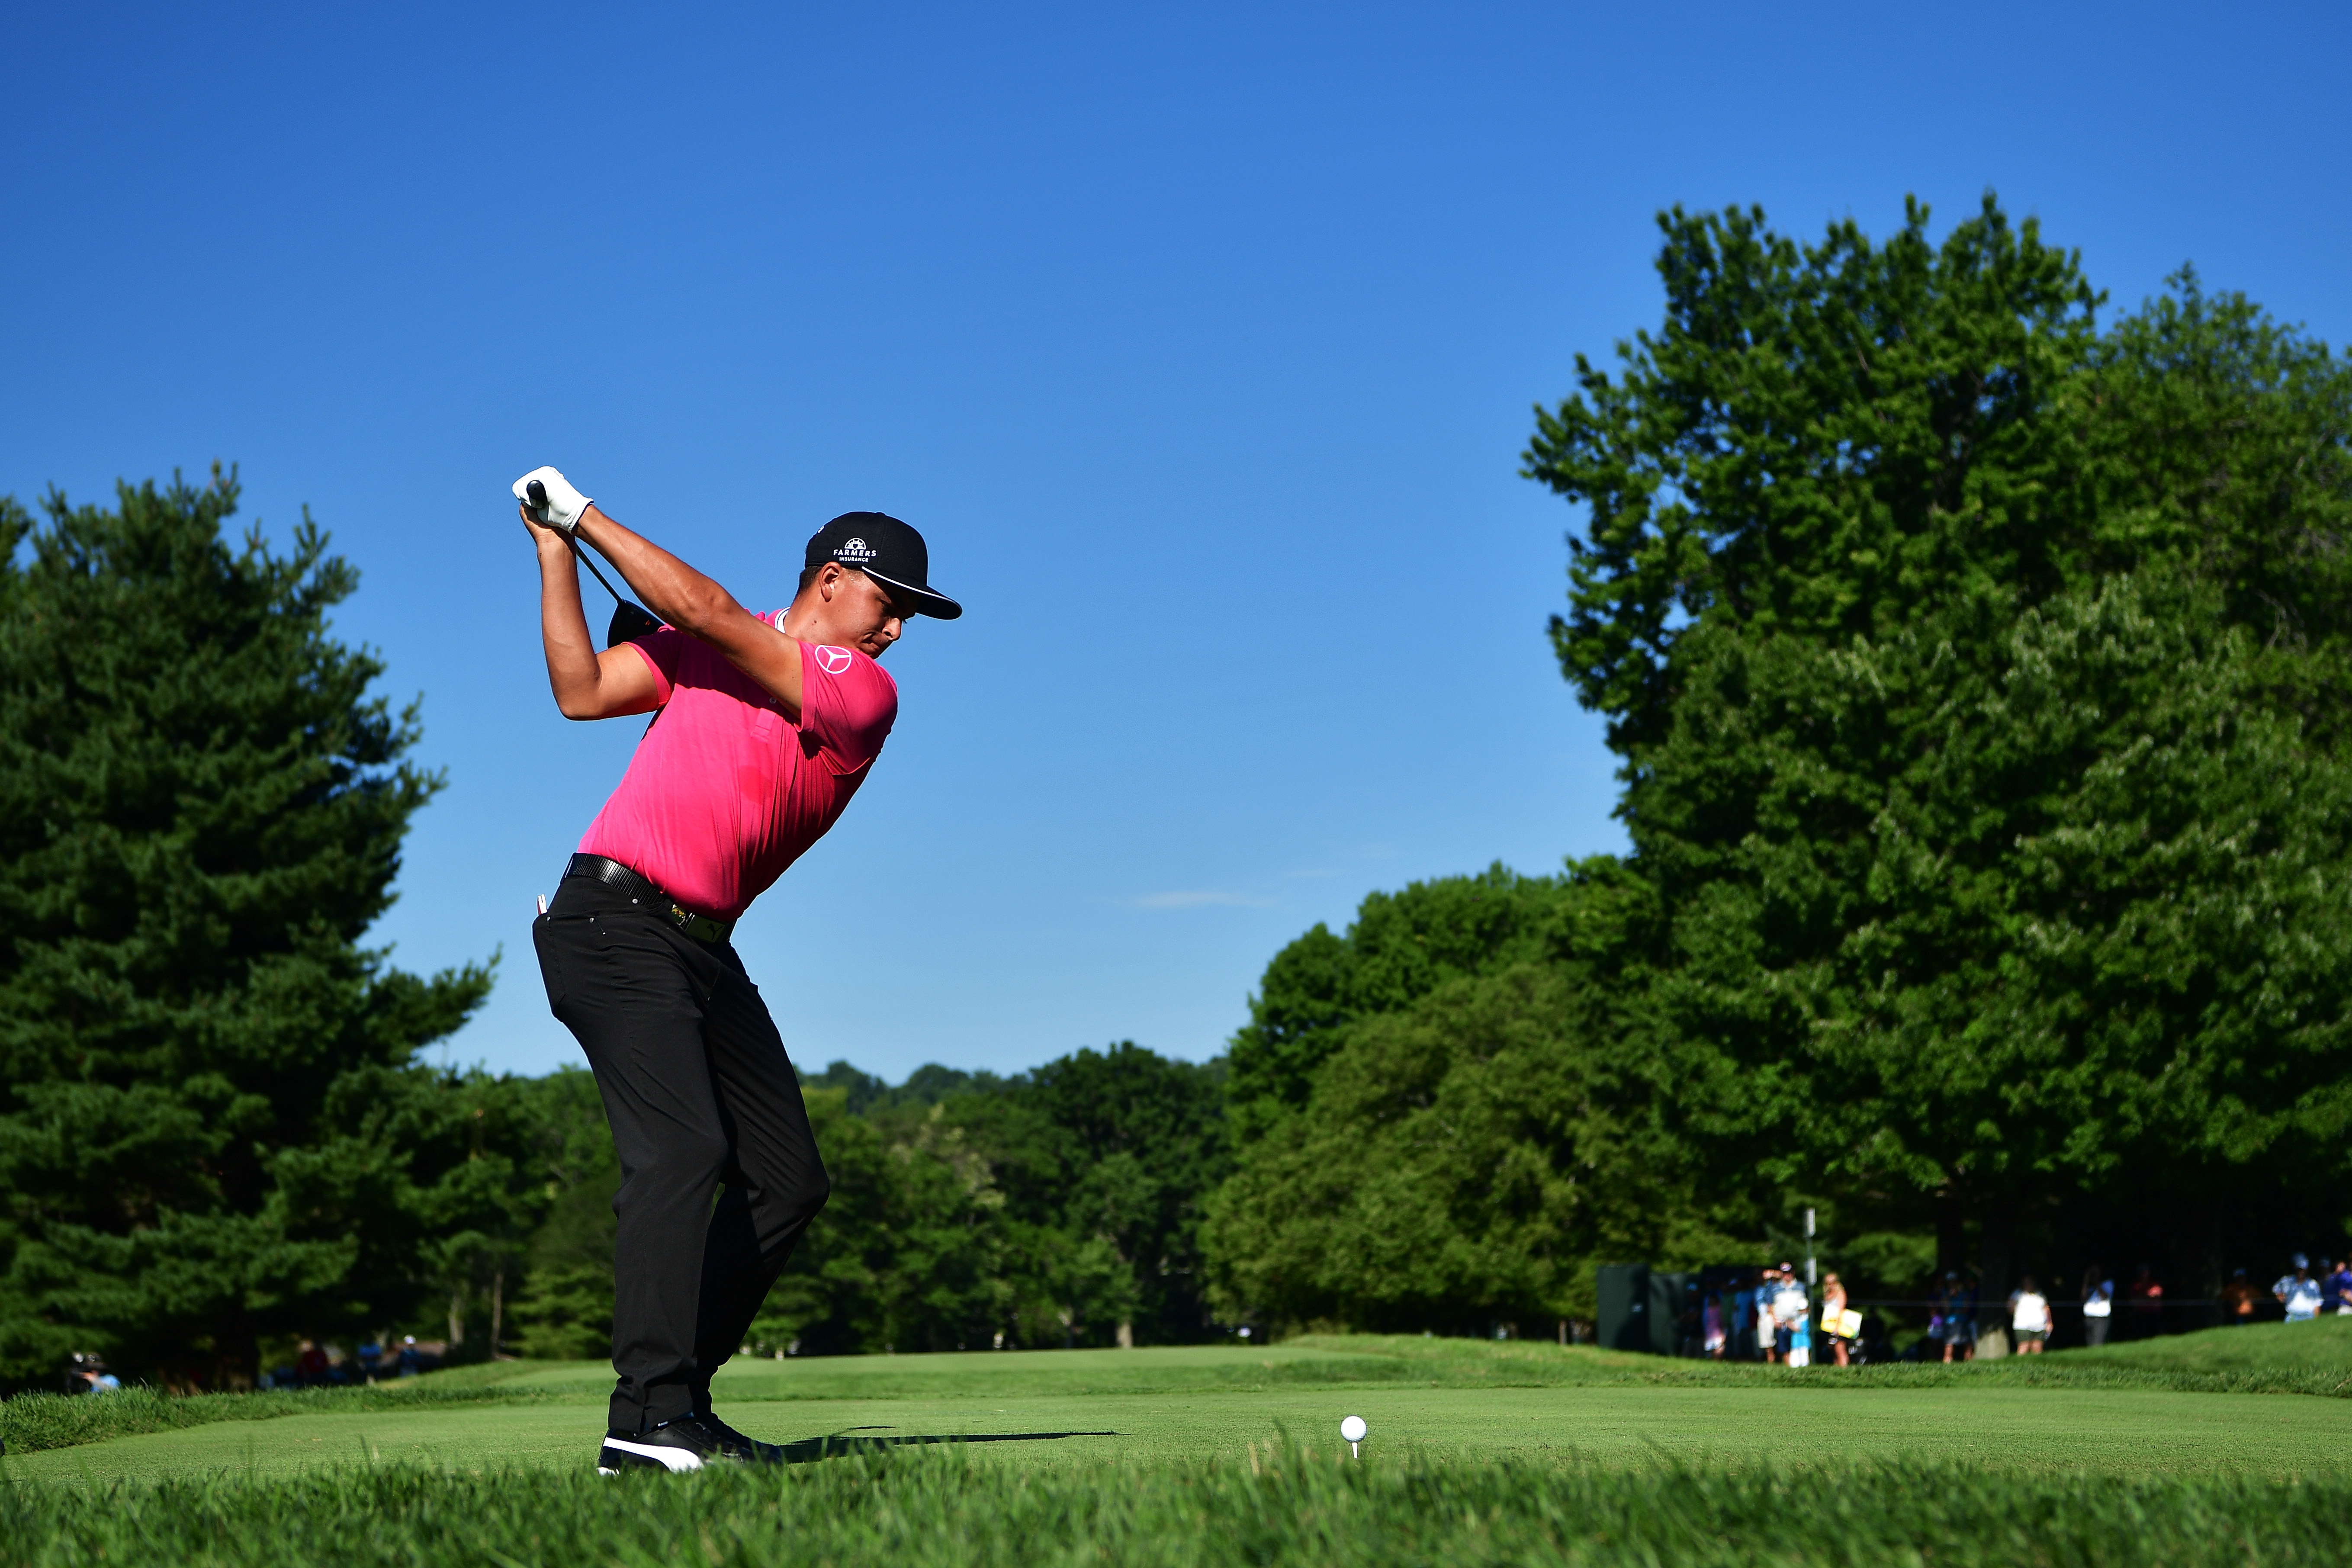 How to Watch the PGA Championship for Free